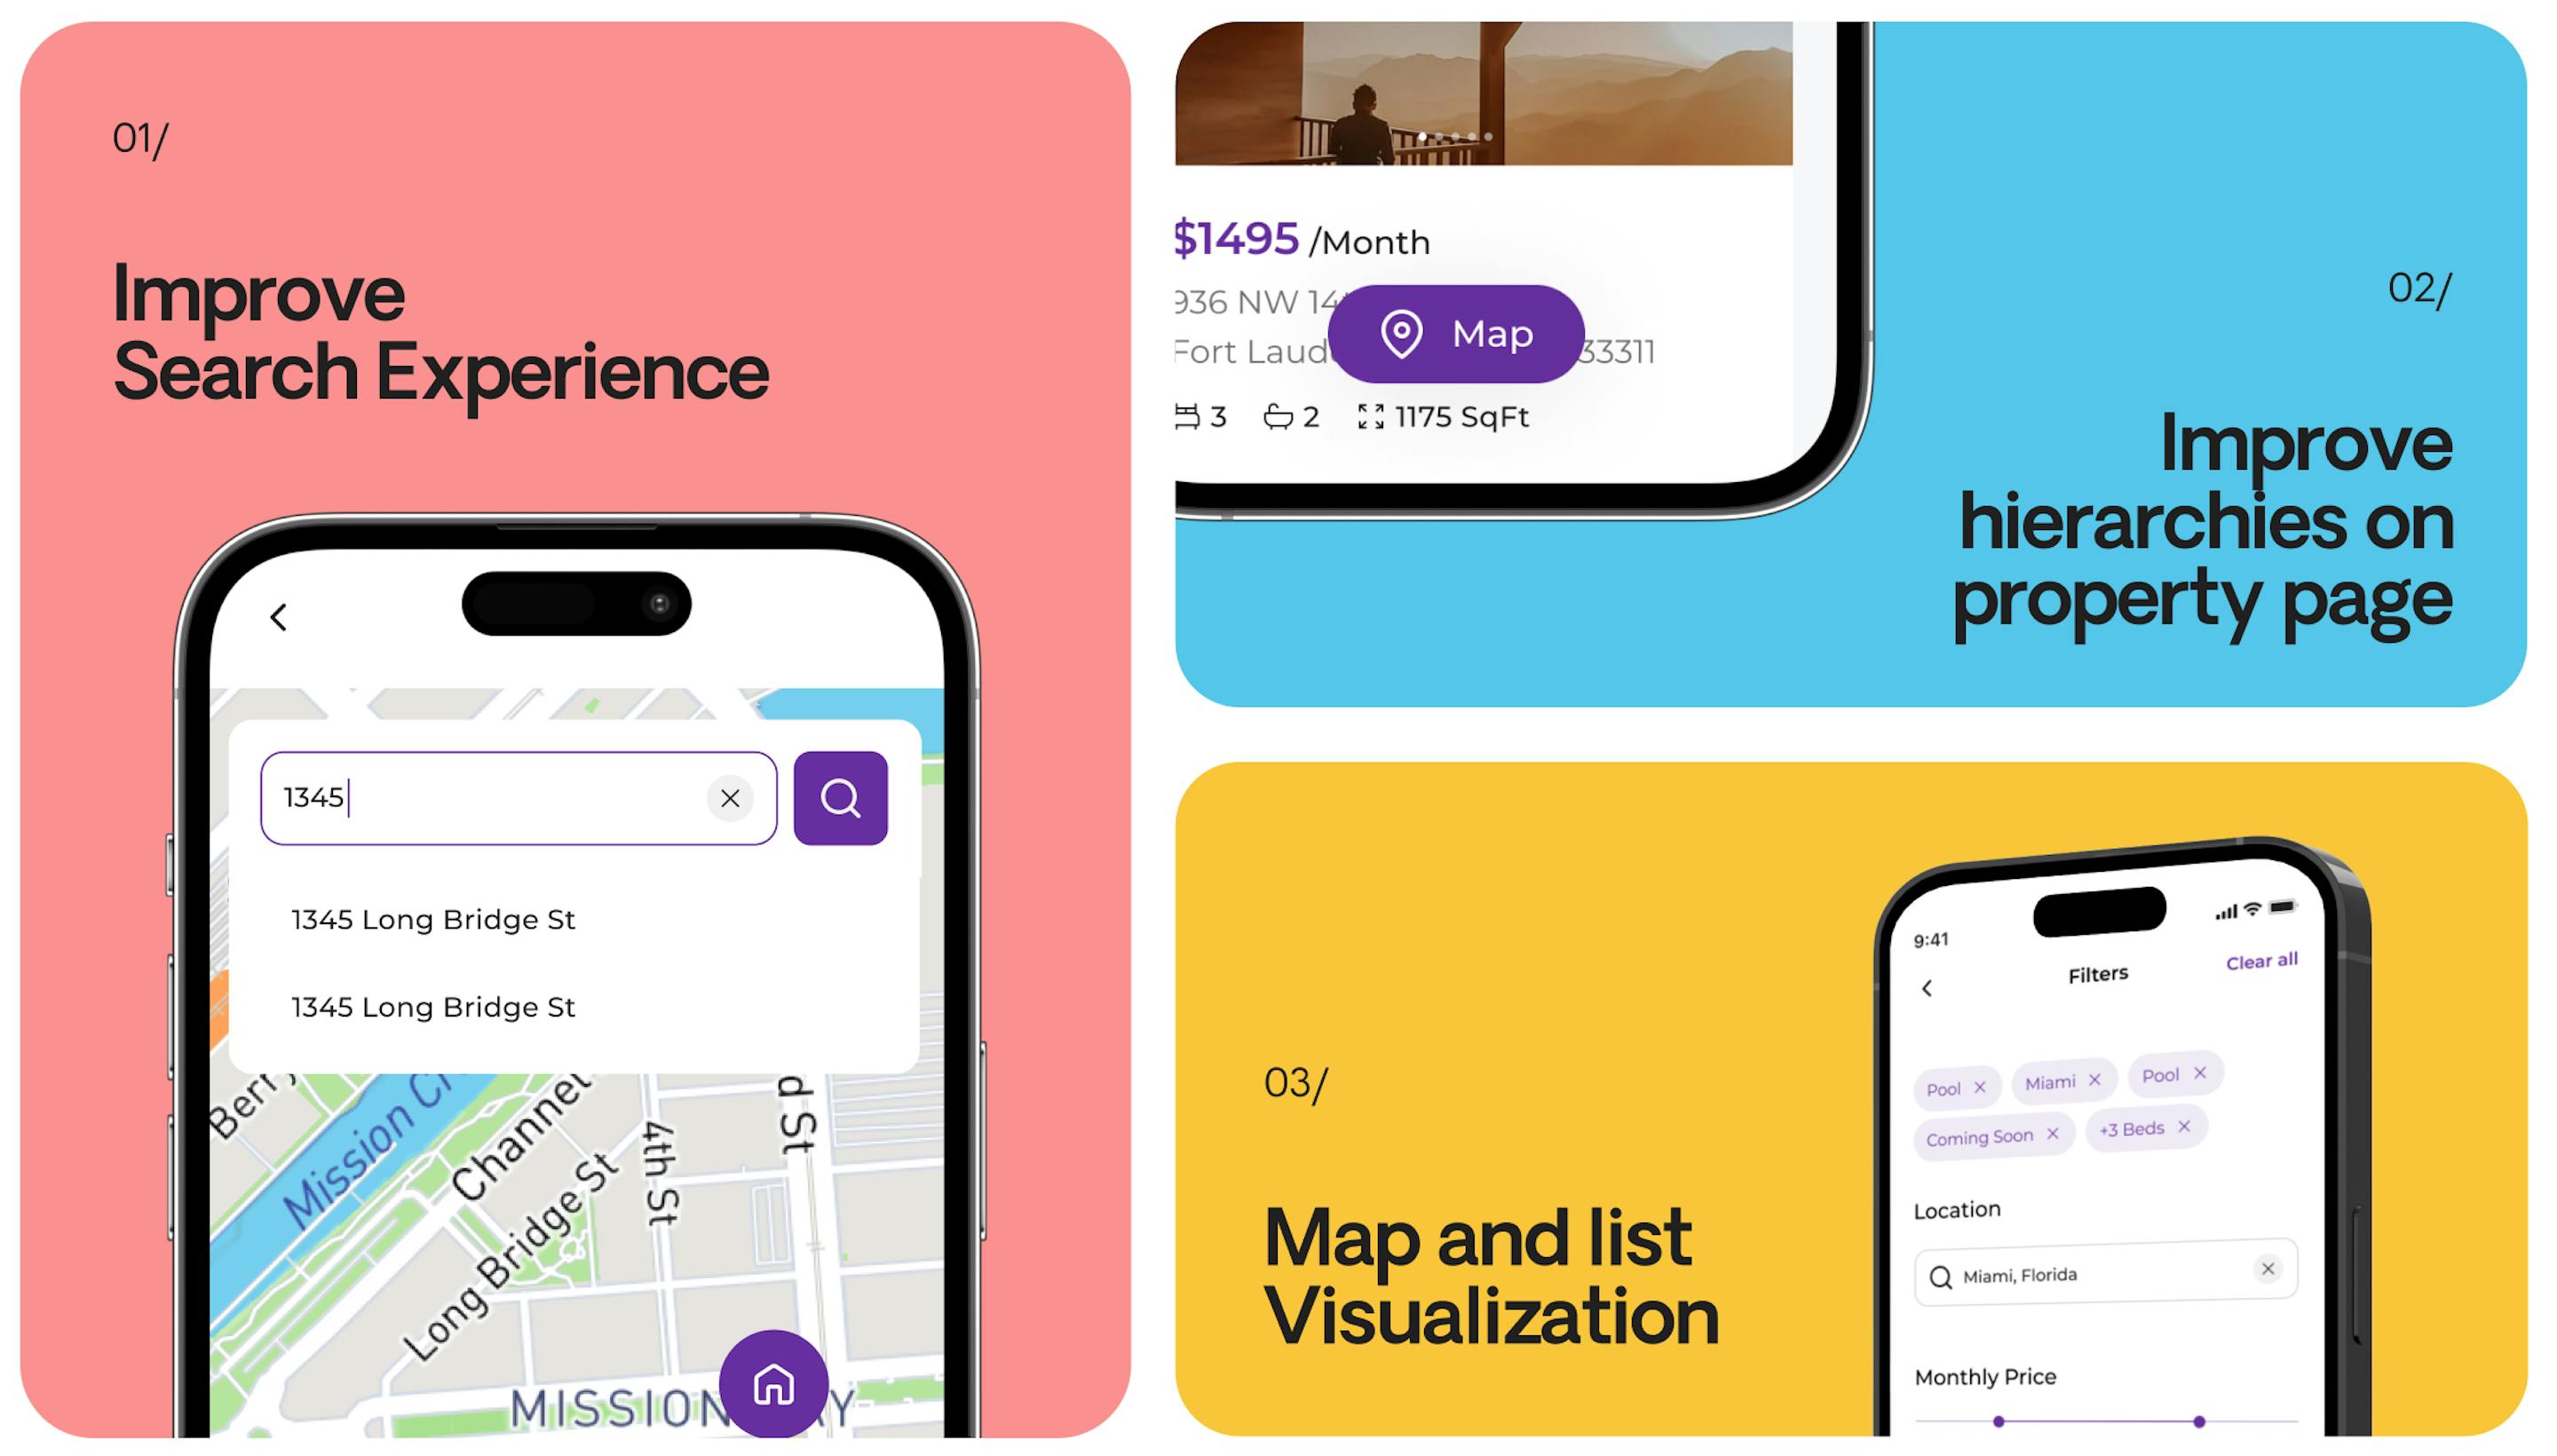 Search experience and map visualization